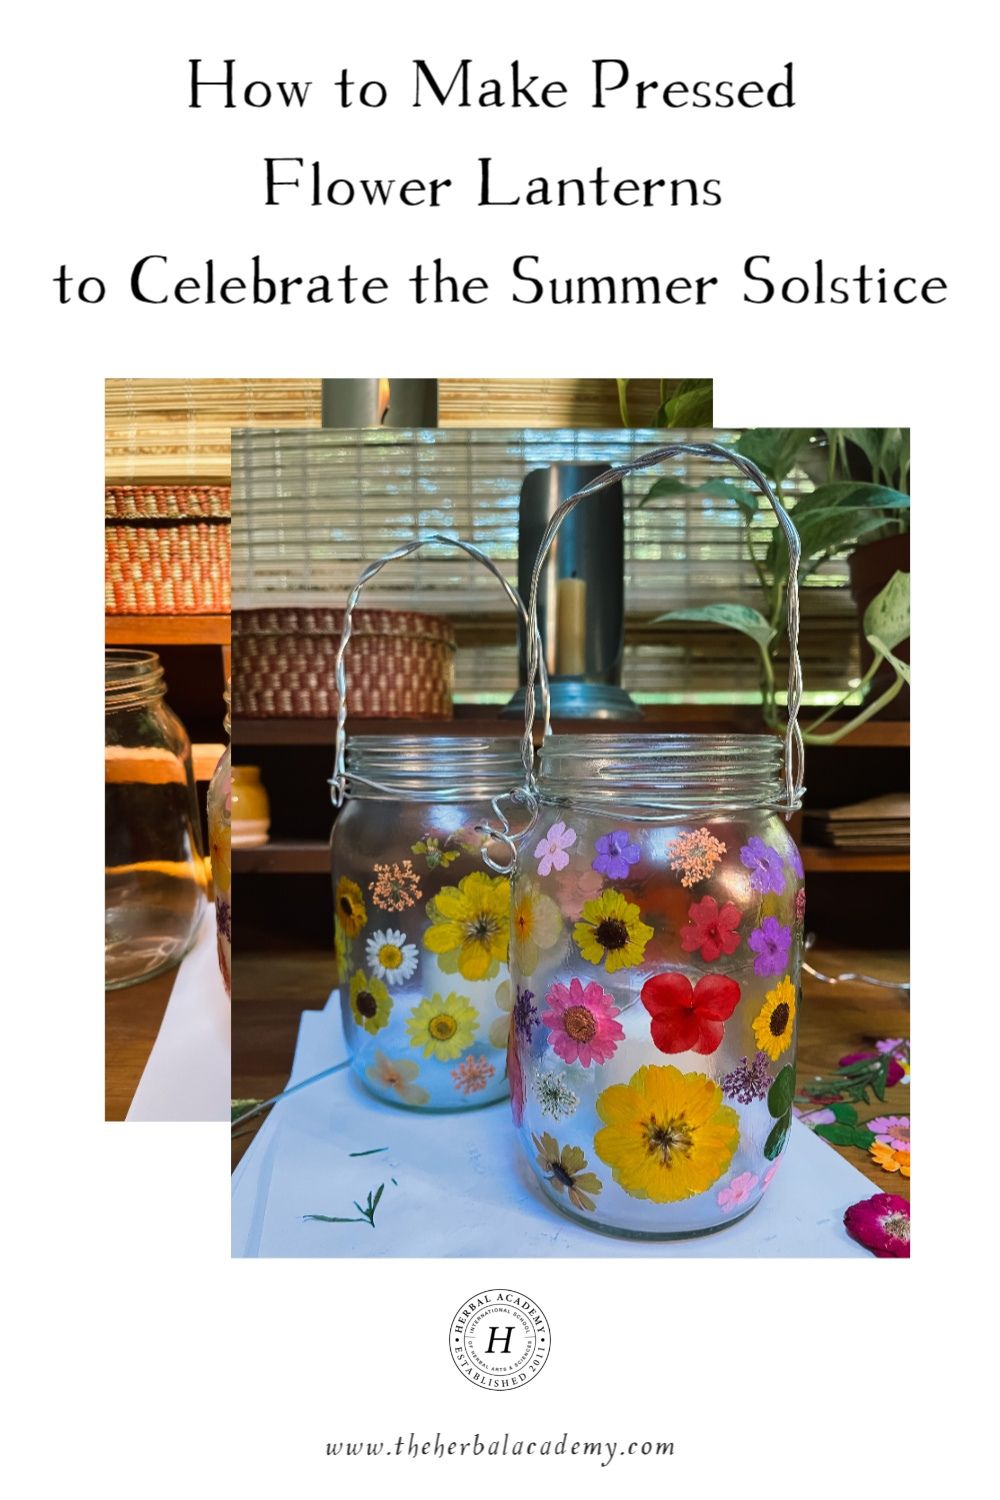 How to Make Pressed Flower Lanterns to Celebrate the Summer Solstice | Herbal Academy | As a way to celebrate the summer solstice, DIY flower lanterns are a creative way to encourage the sun to brighten the rest of the year.